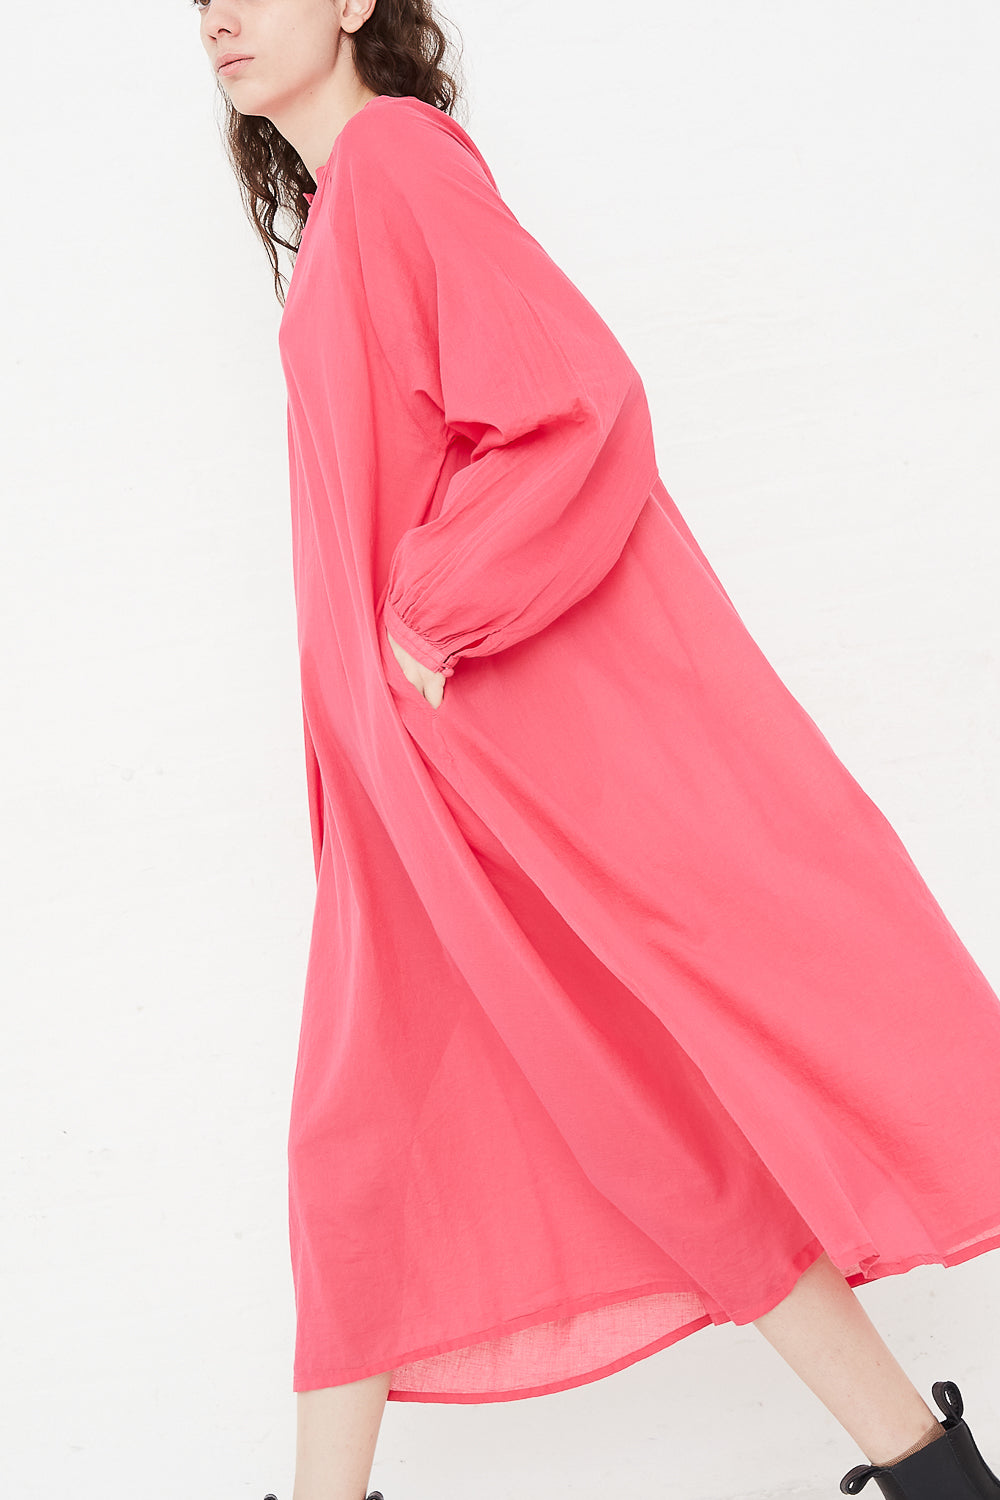 Dress in Pink side view with hand in pocket